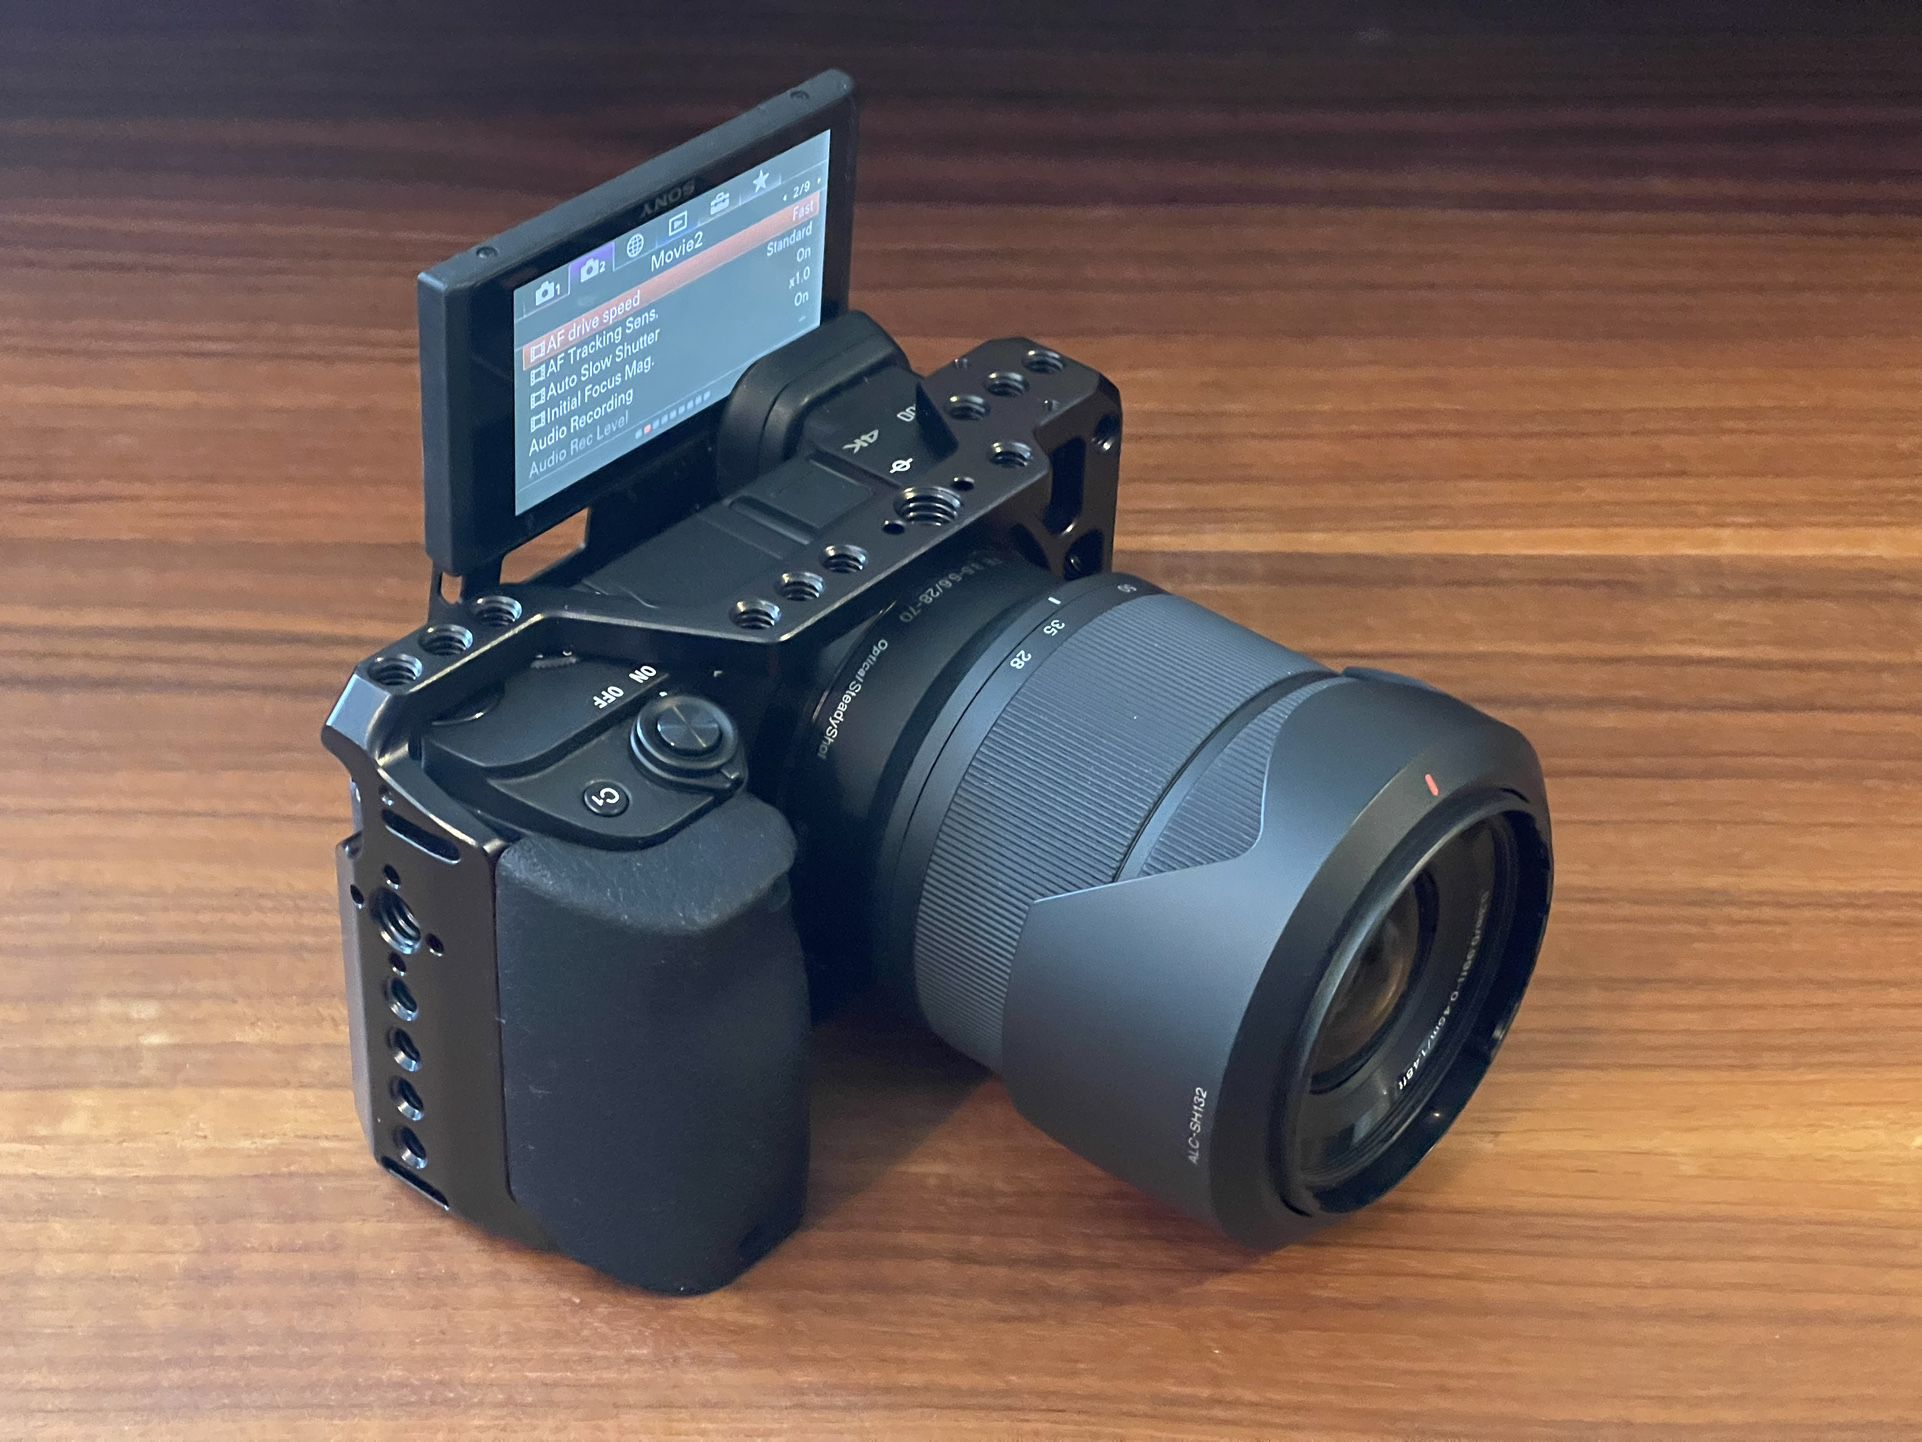 Sony a6400 with 3 lenses ~ 850 shutter, Mint condition